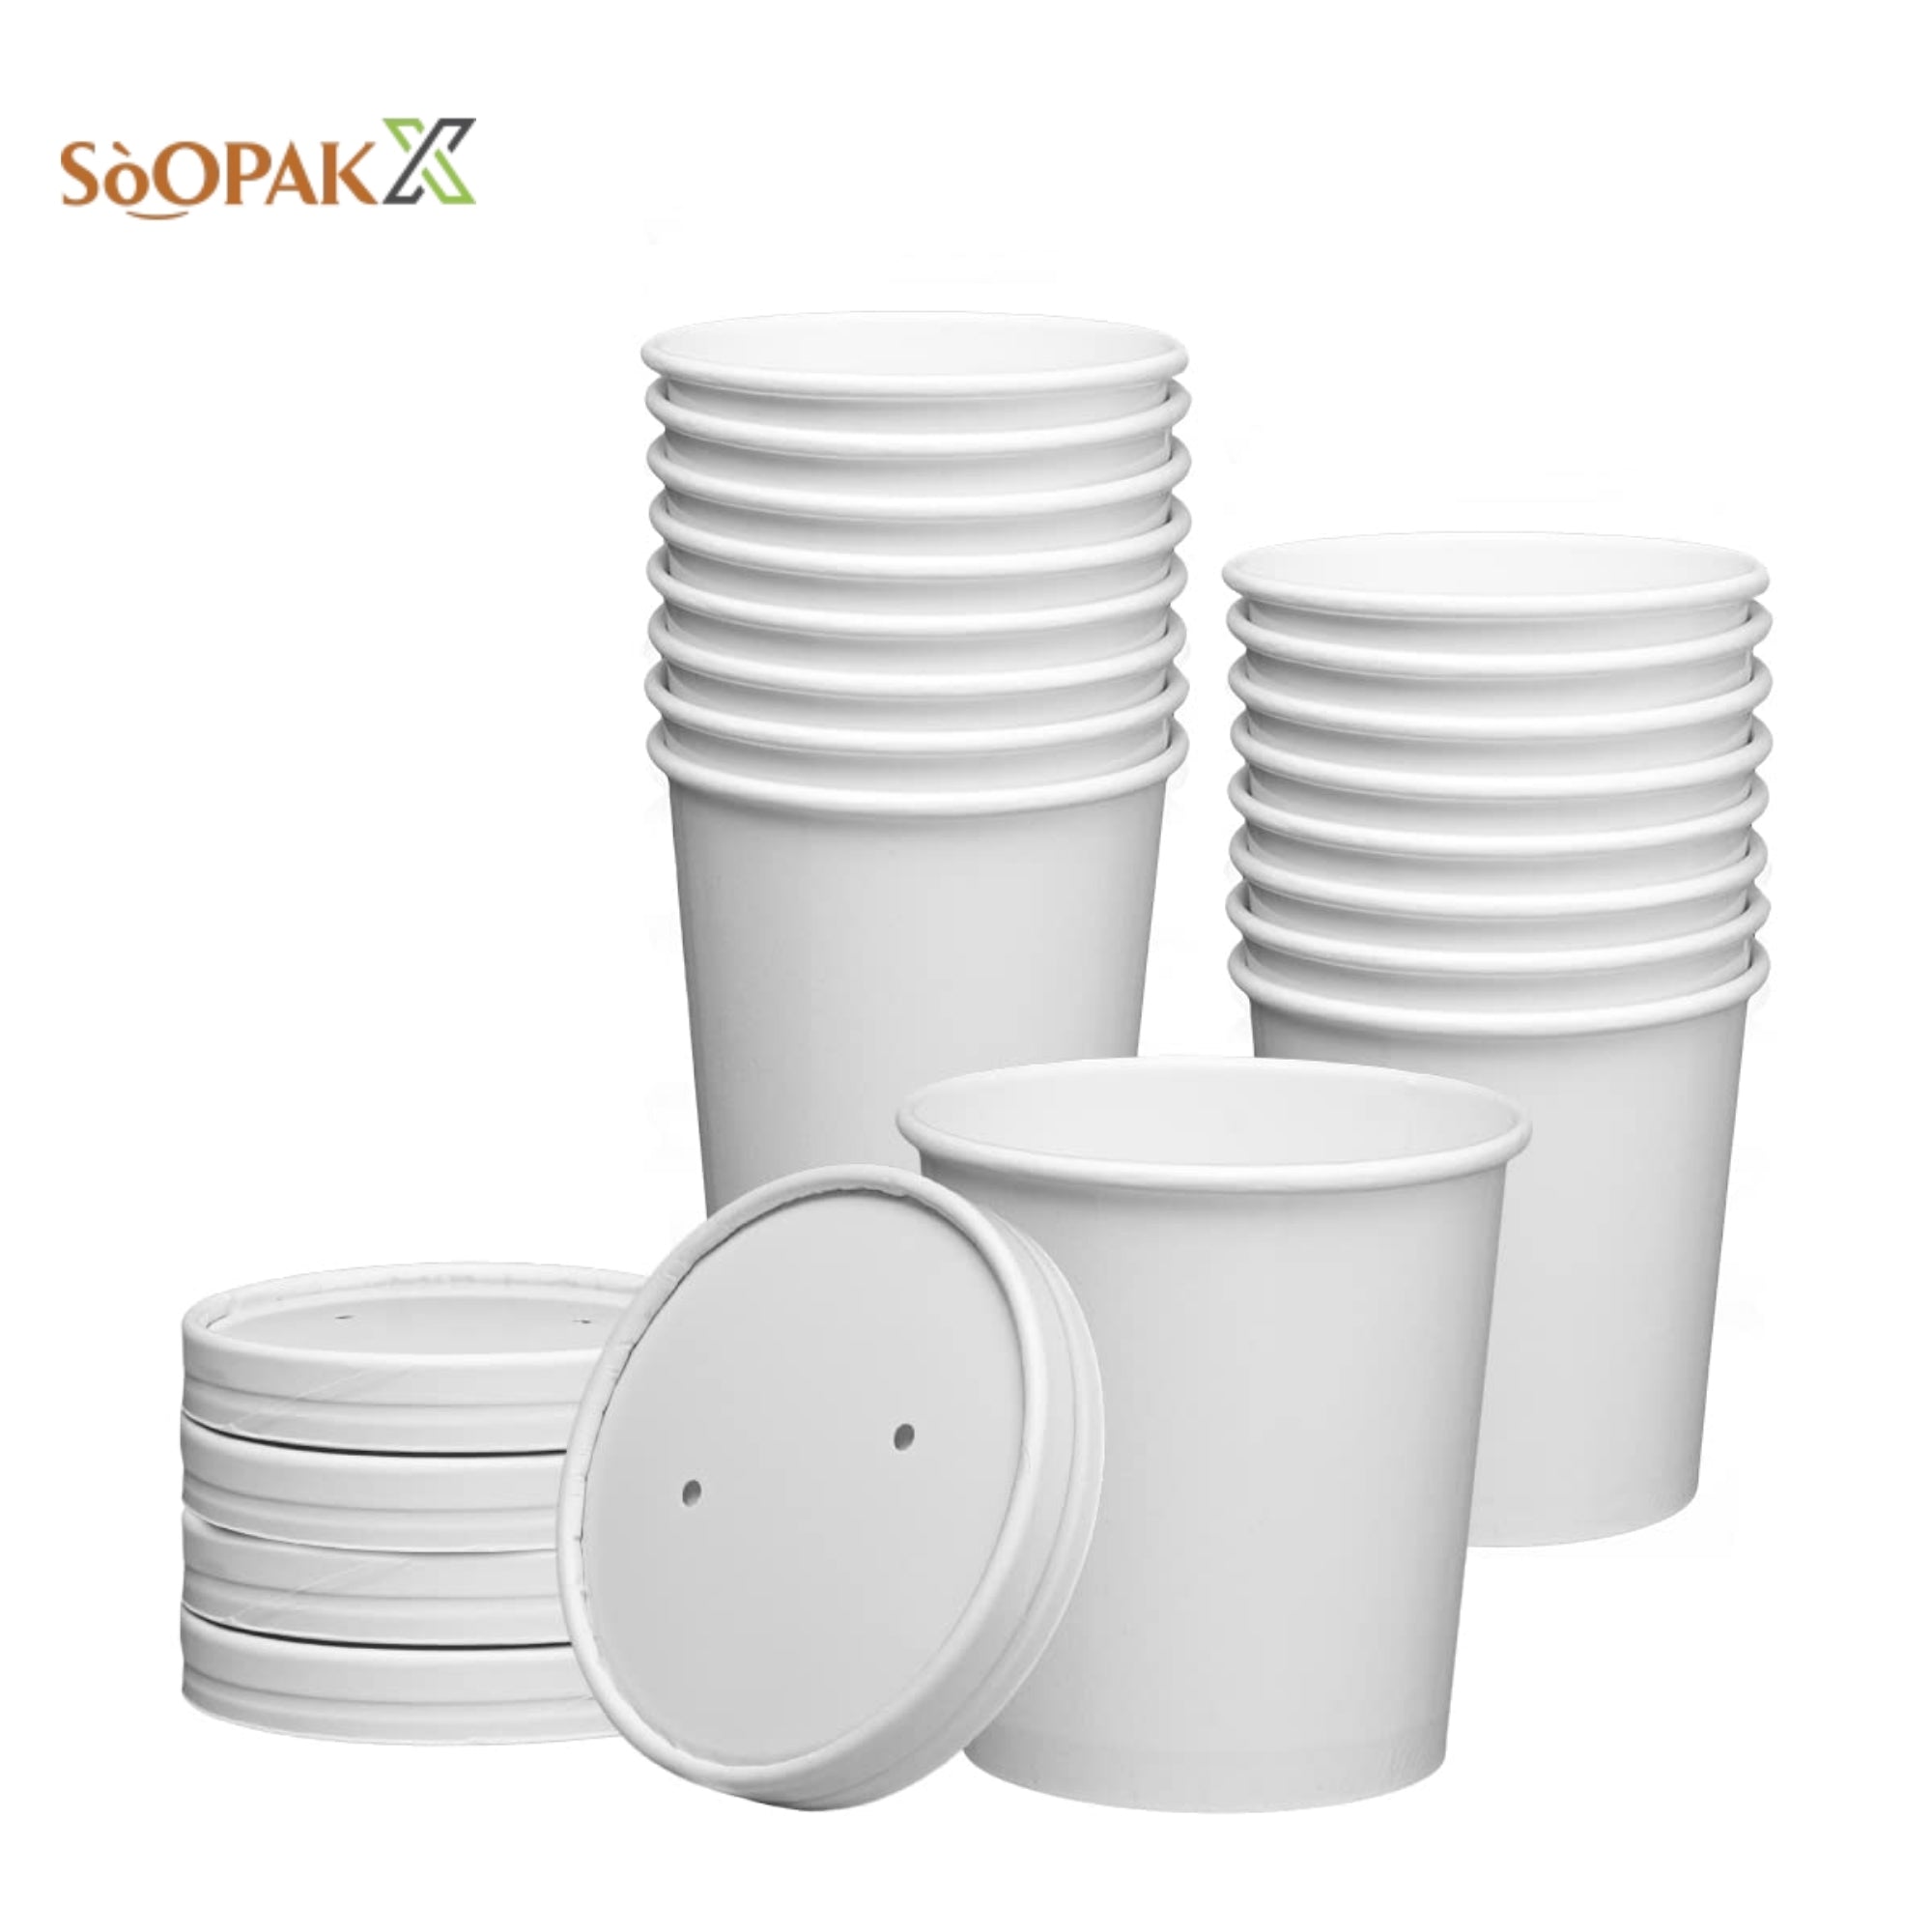 White Paper Lid, avoid leaks, durable, warming, biodegradable, paper flat lids, freshness, takeout, Packaging, easy visibility, food safe, avoid leaks, high-quality, dinnerware, recyclable lids, Ecosmart, sustainable, coffee, tea